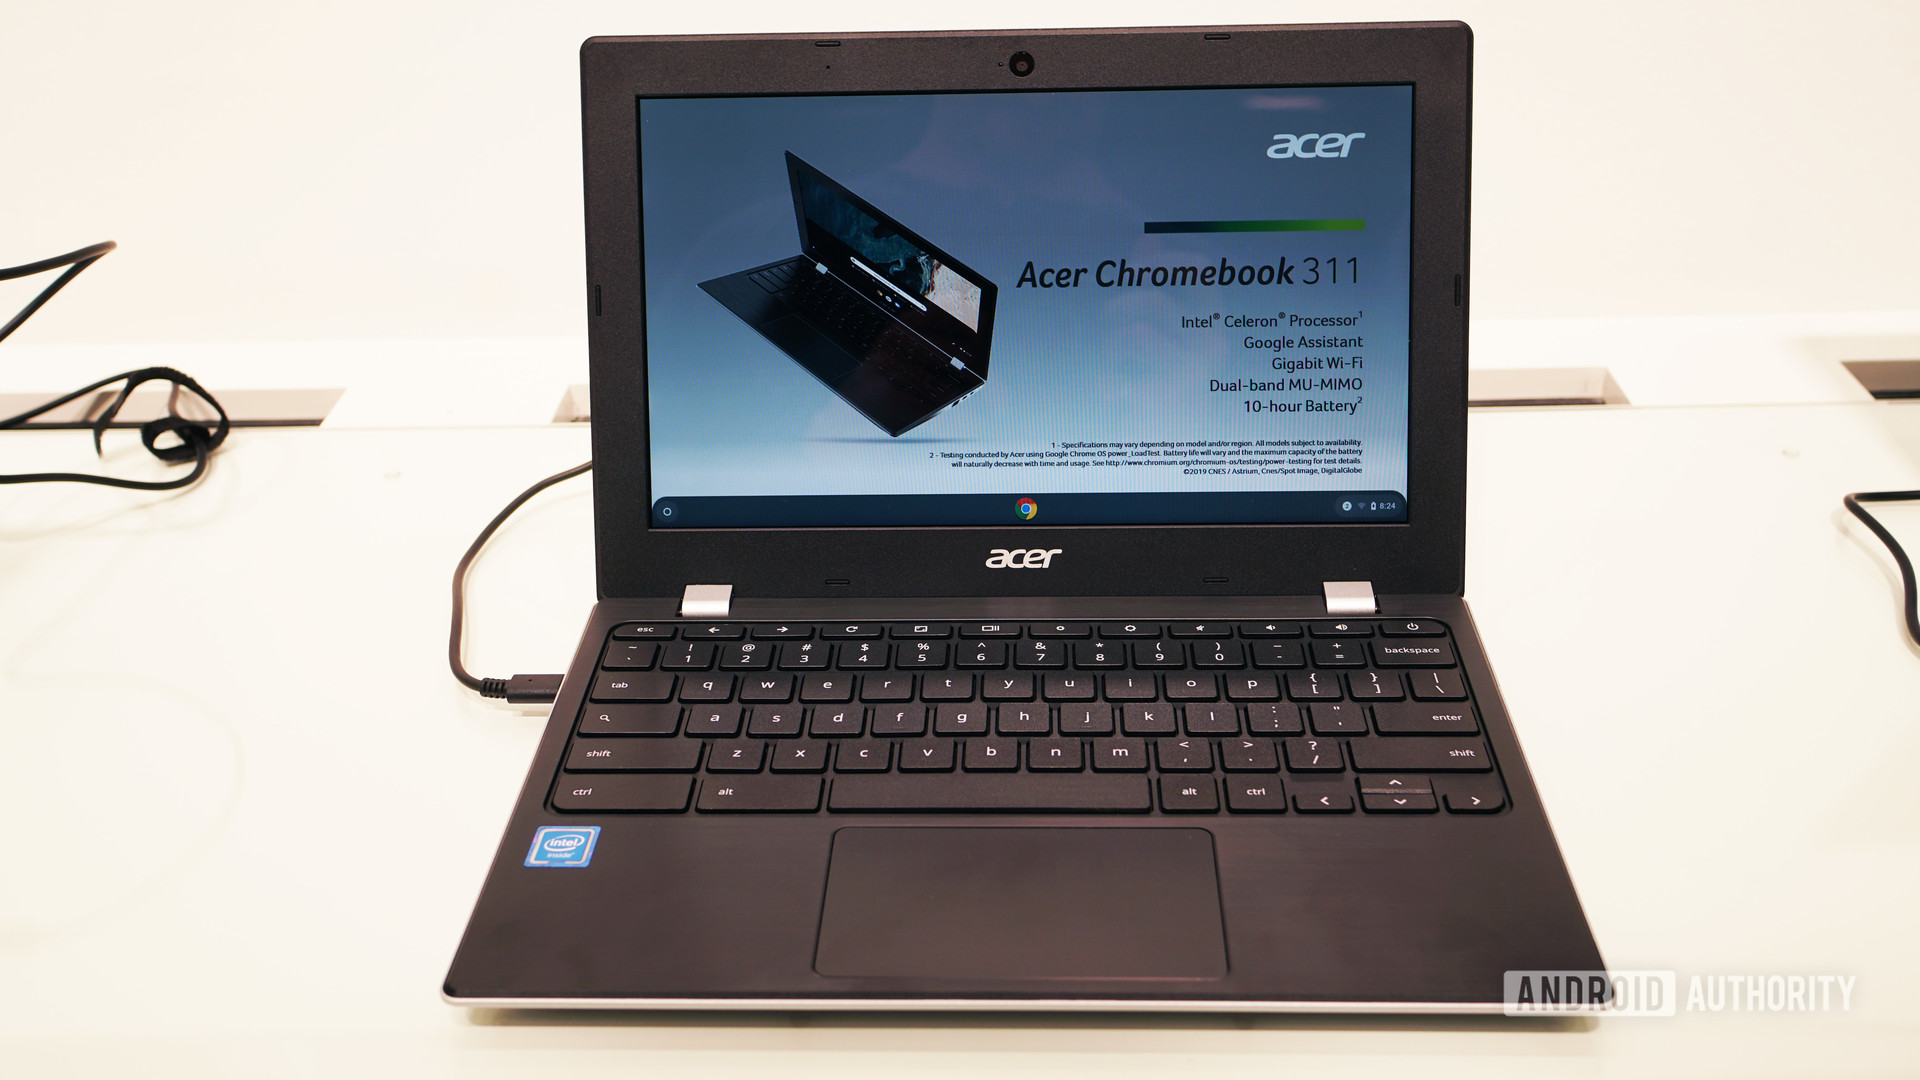 Acer Chromebook 311 display and keyboard